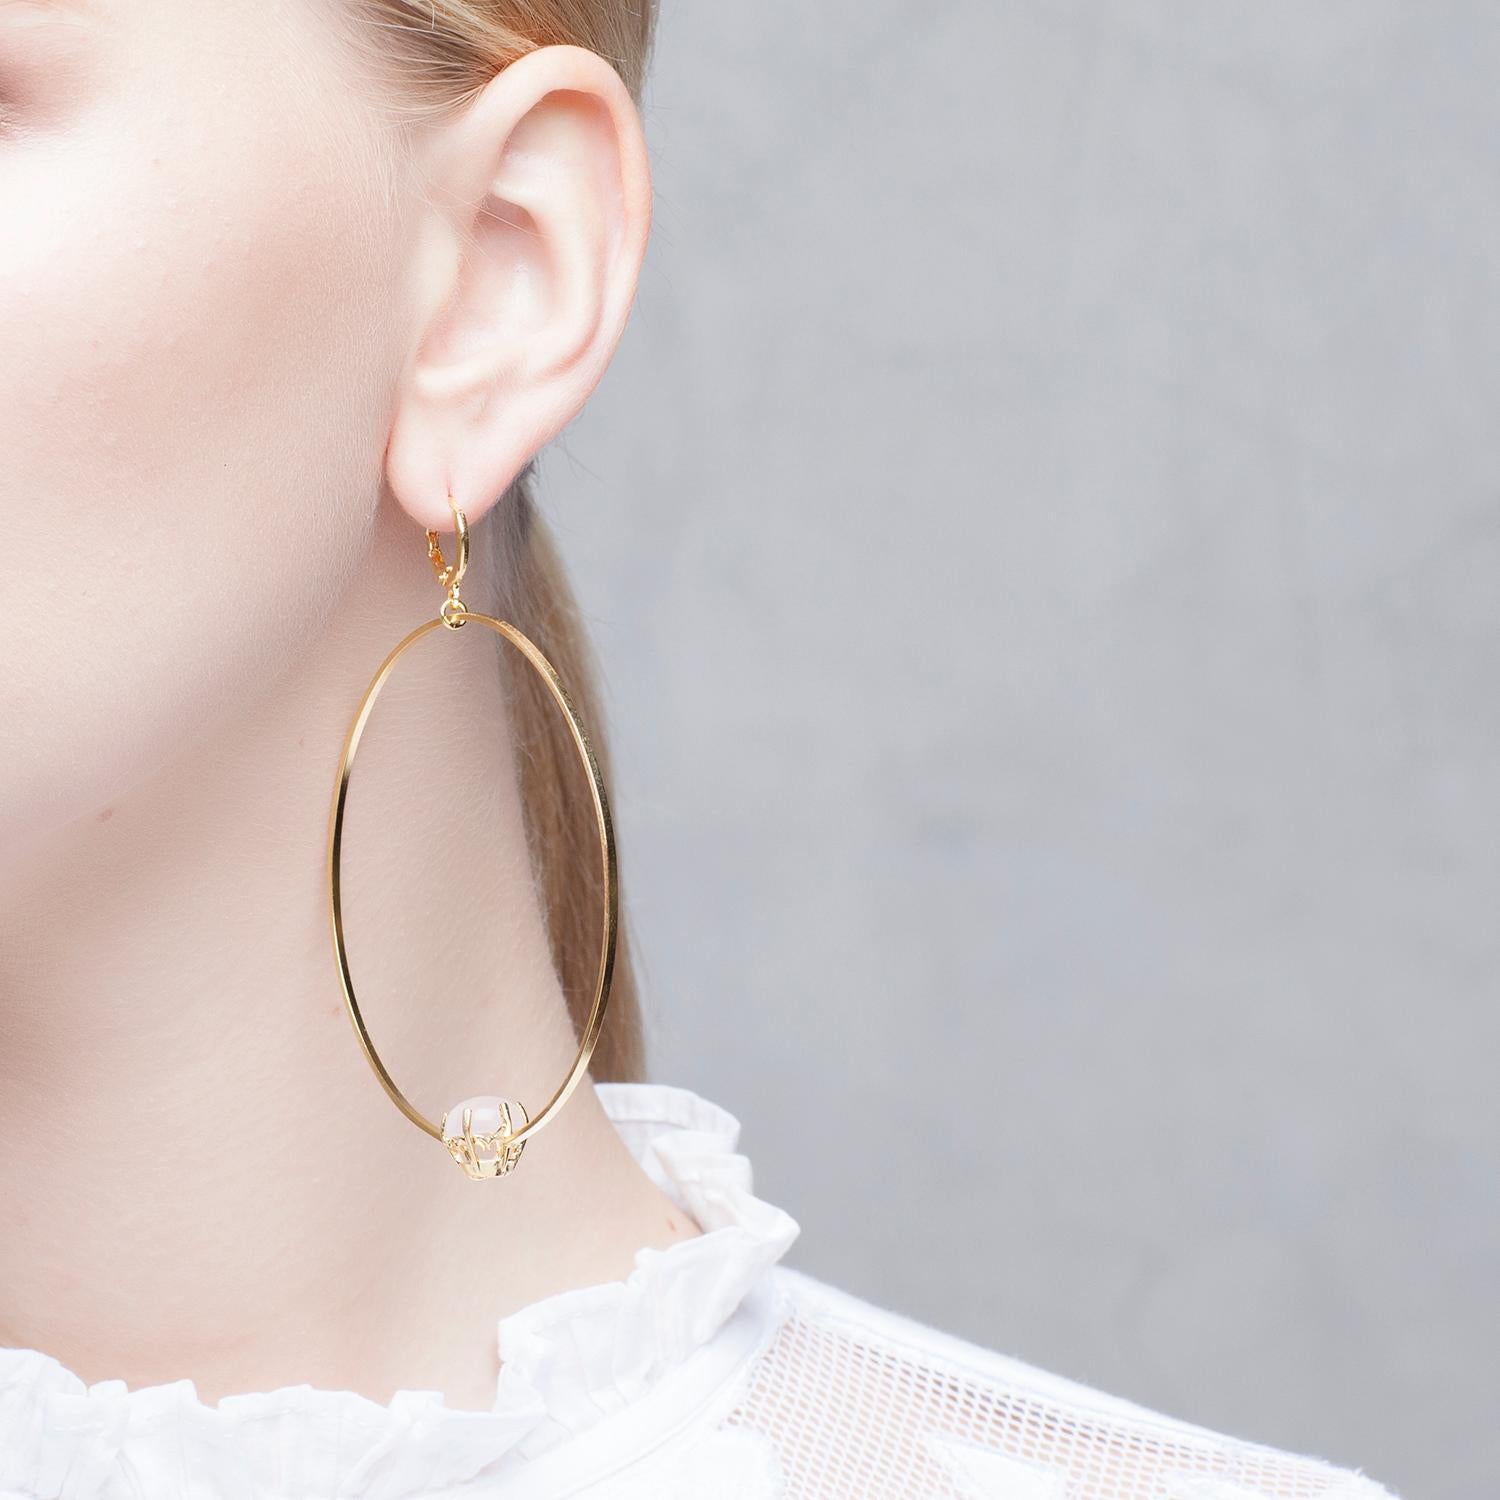 Puro Iosselliani presents its iconic creole big hoop earrings. Made in 18 Karat gold plated silver, the big hoops float effortlessly by a vintage lever back hook. A reversed green round zircon embellishes the hoop for extra shimmering. 6,5 cm